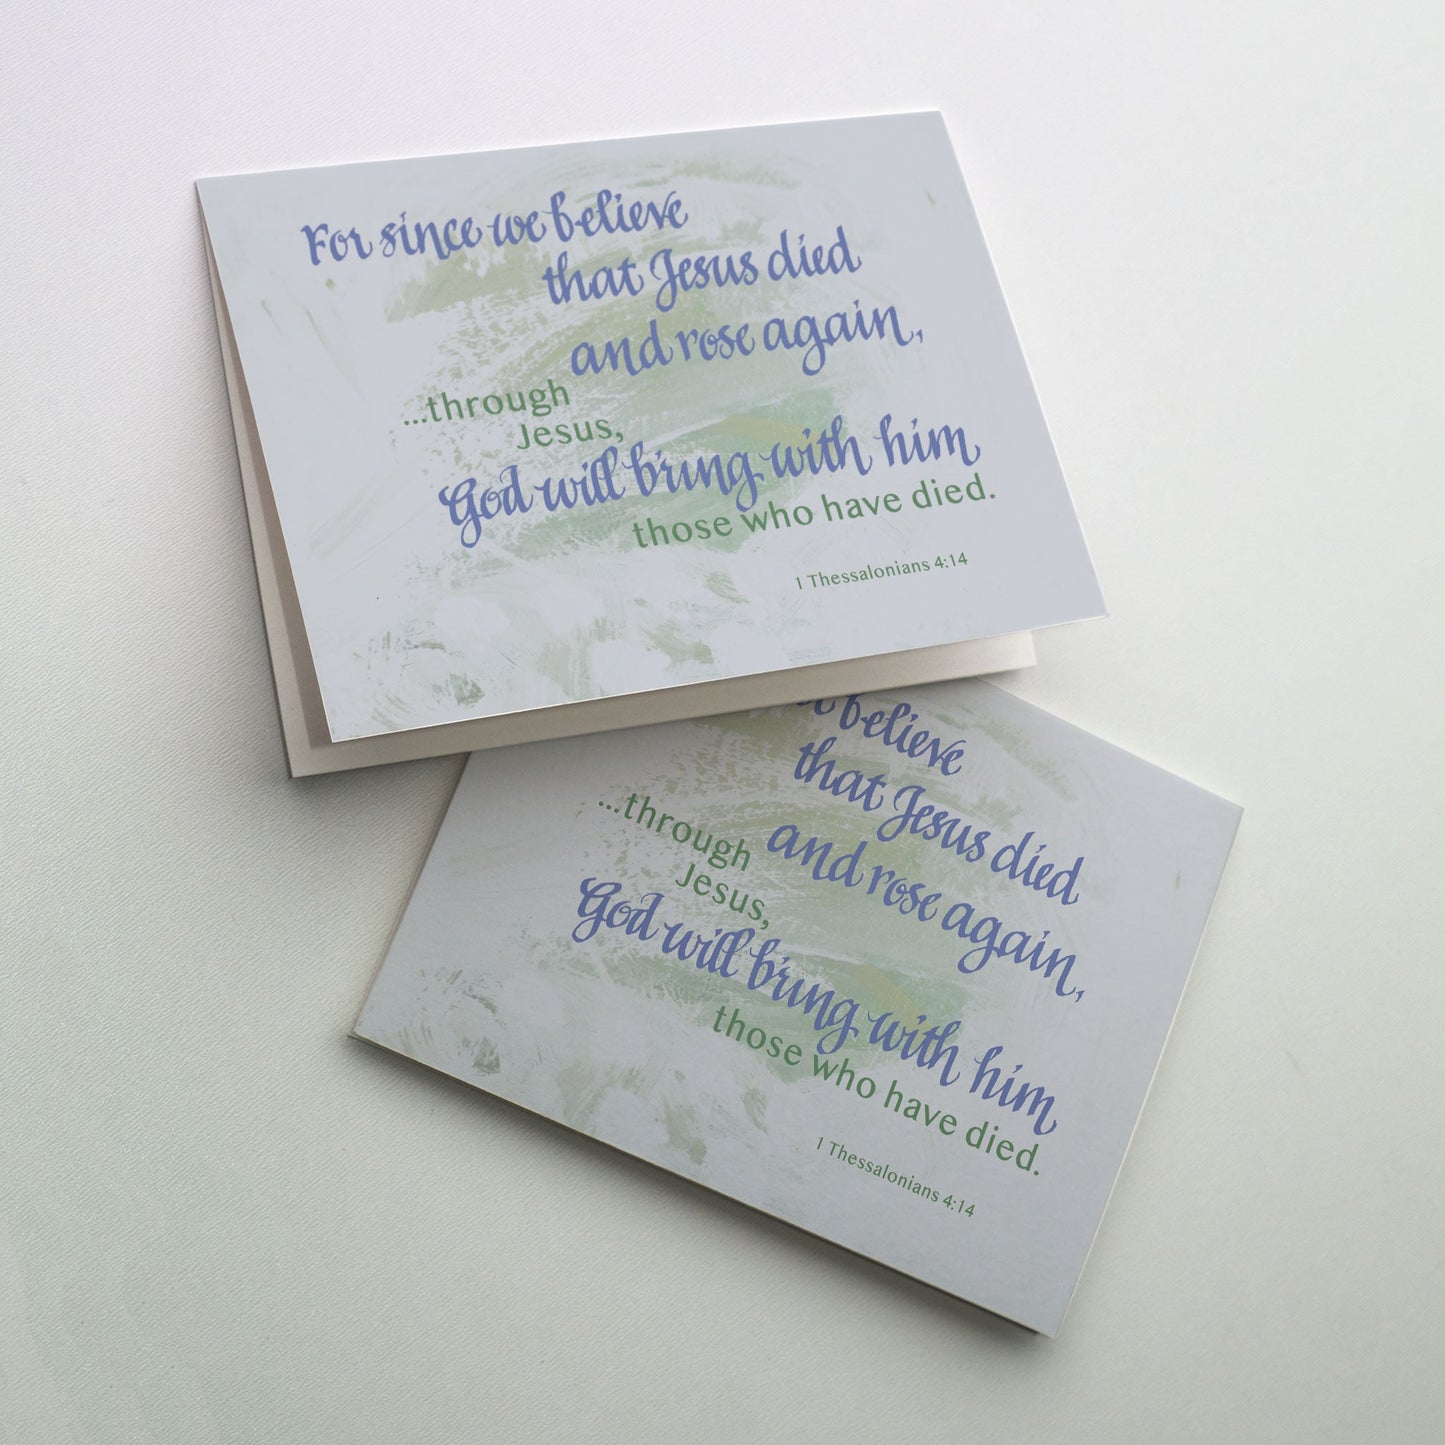 Softly painted expressive background sets off cover calligraphy accented with silver metallic ink.